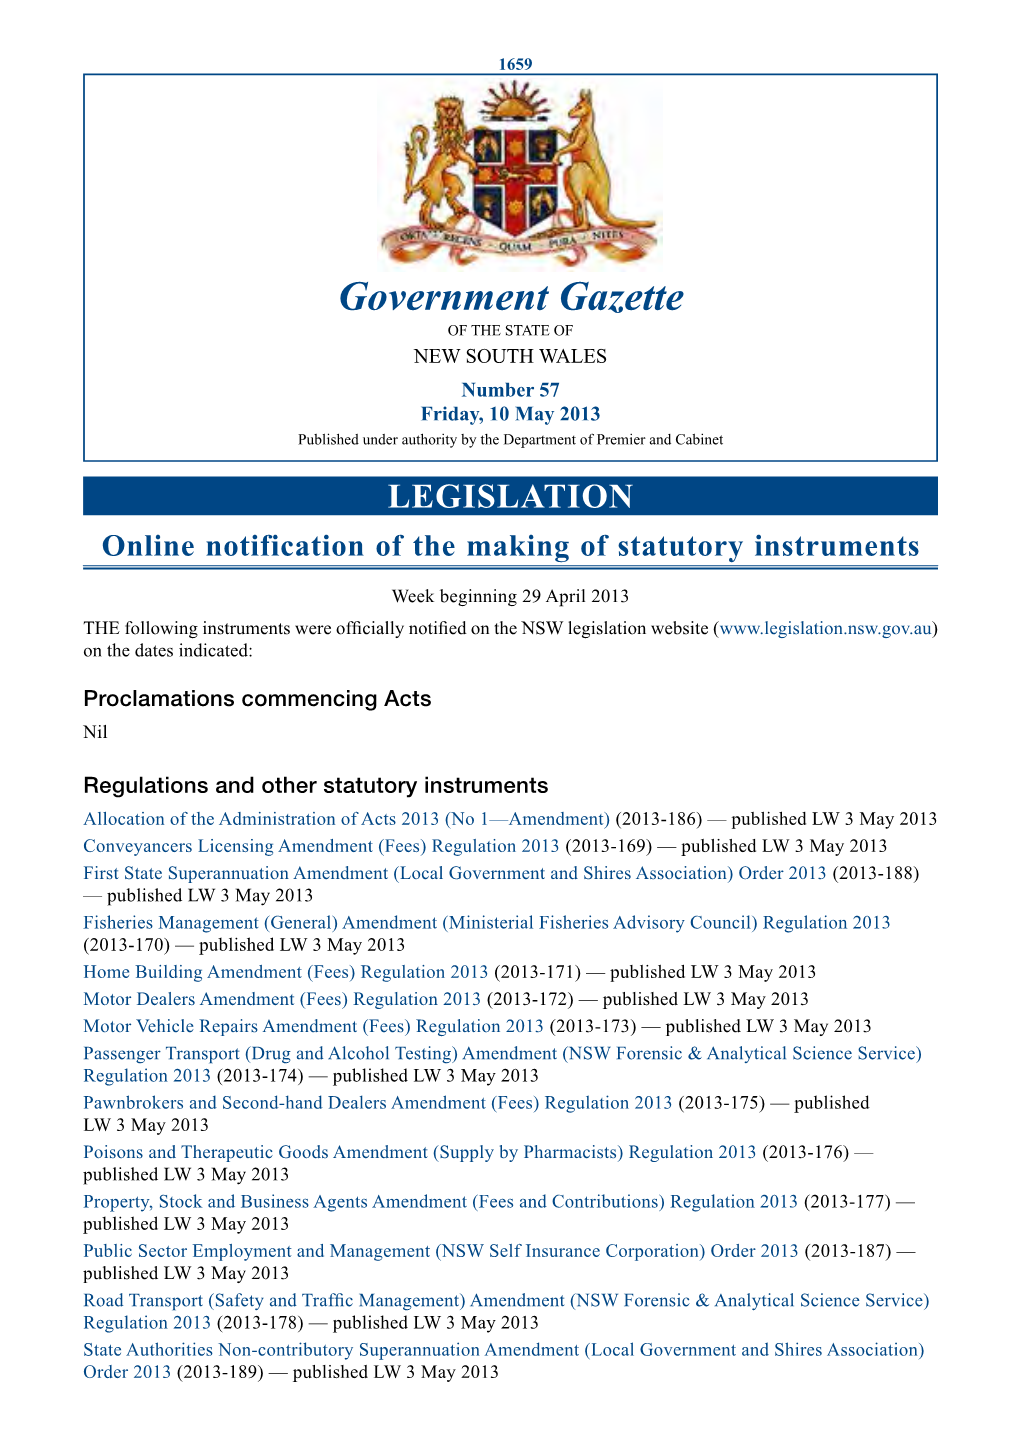 New South Wales Government Gazette No. 19 of 10 May 2013